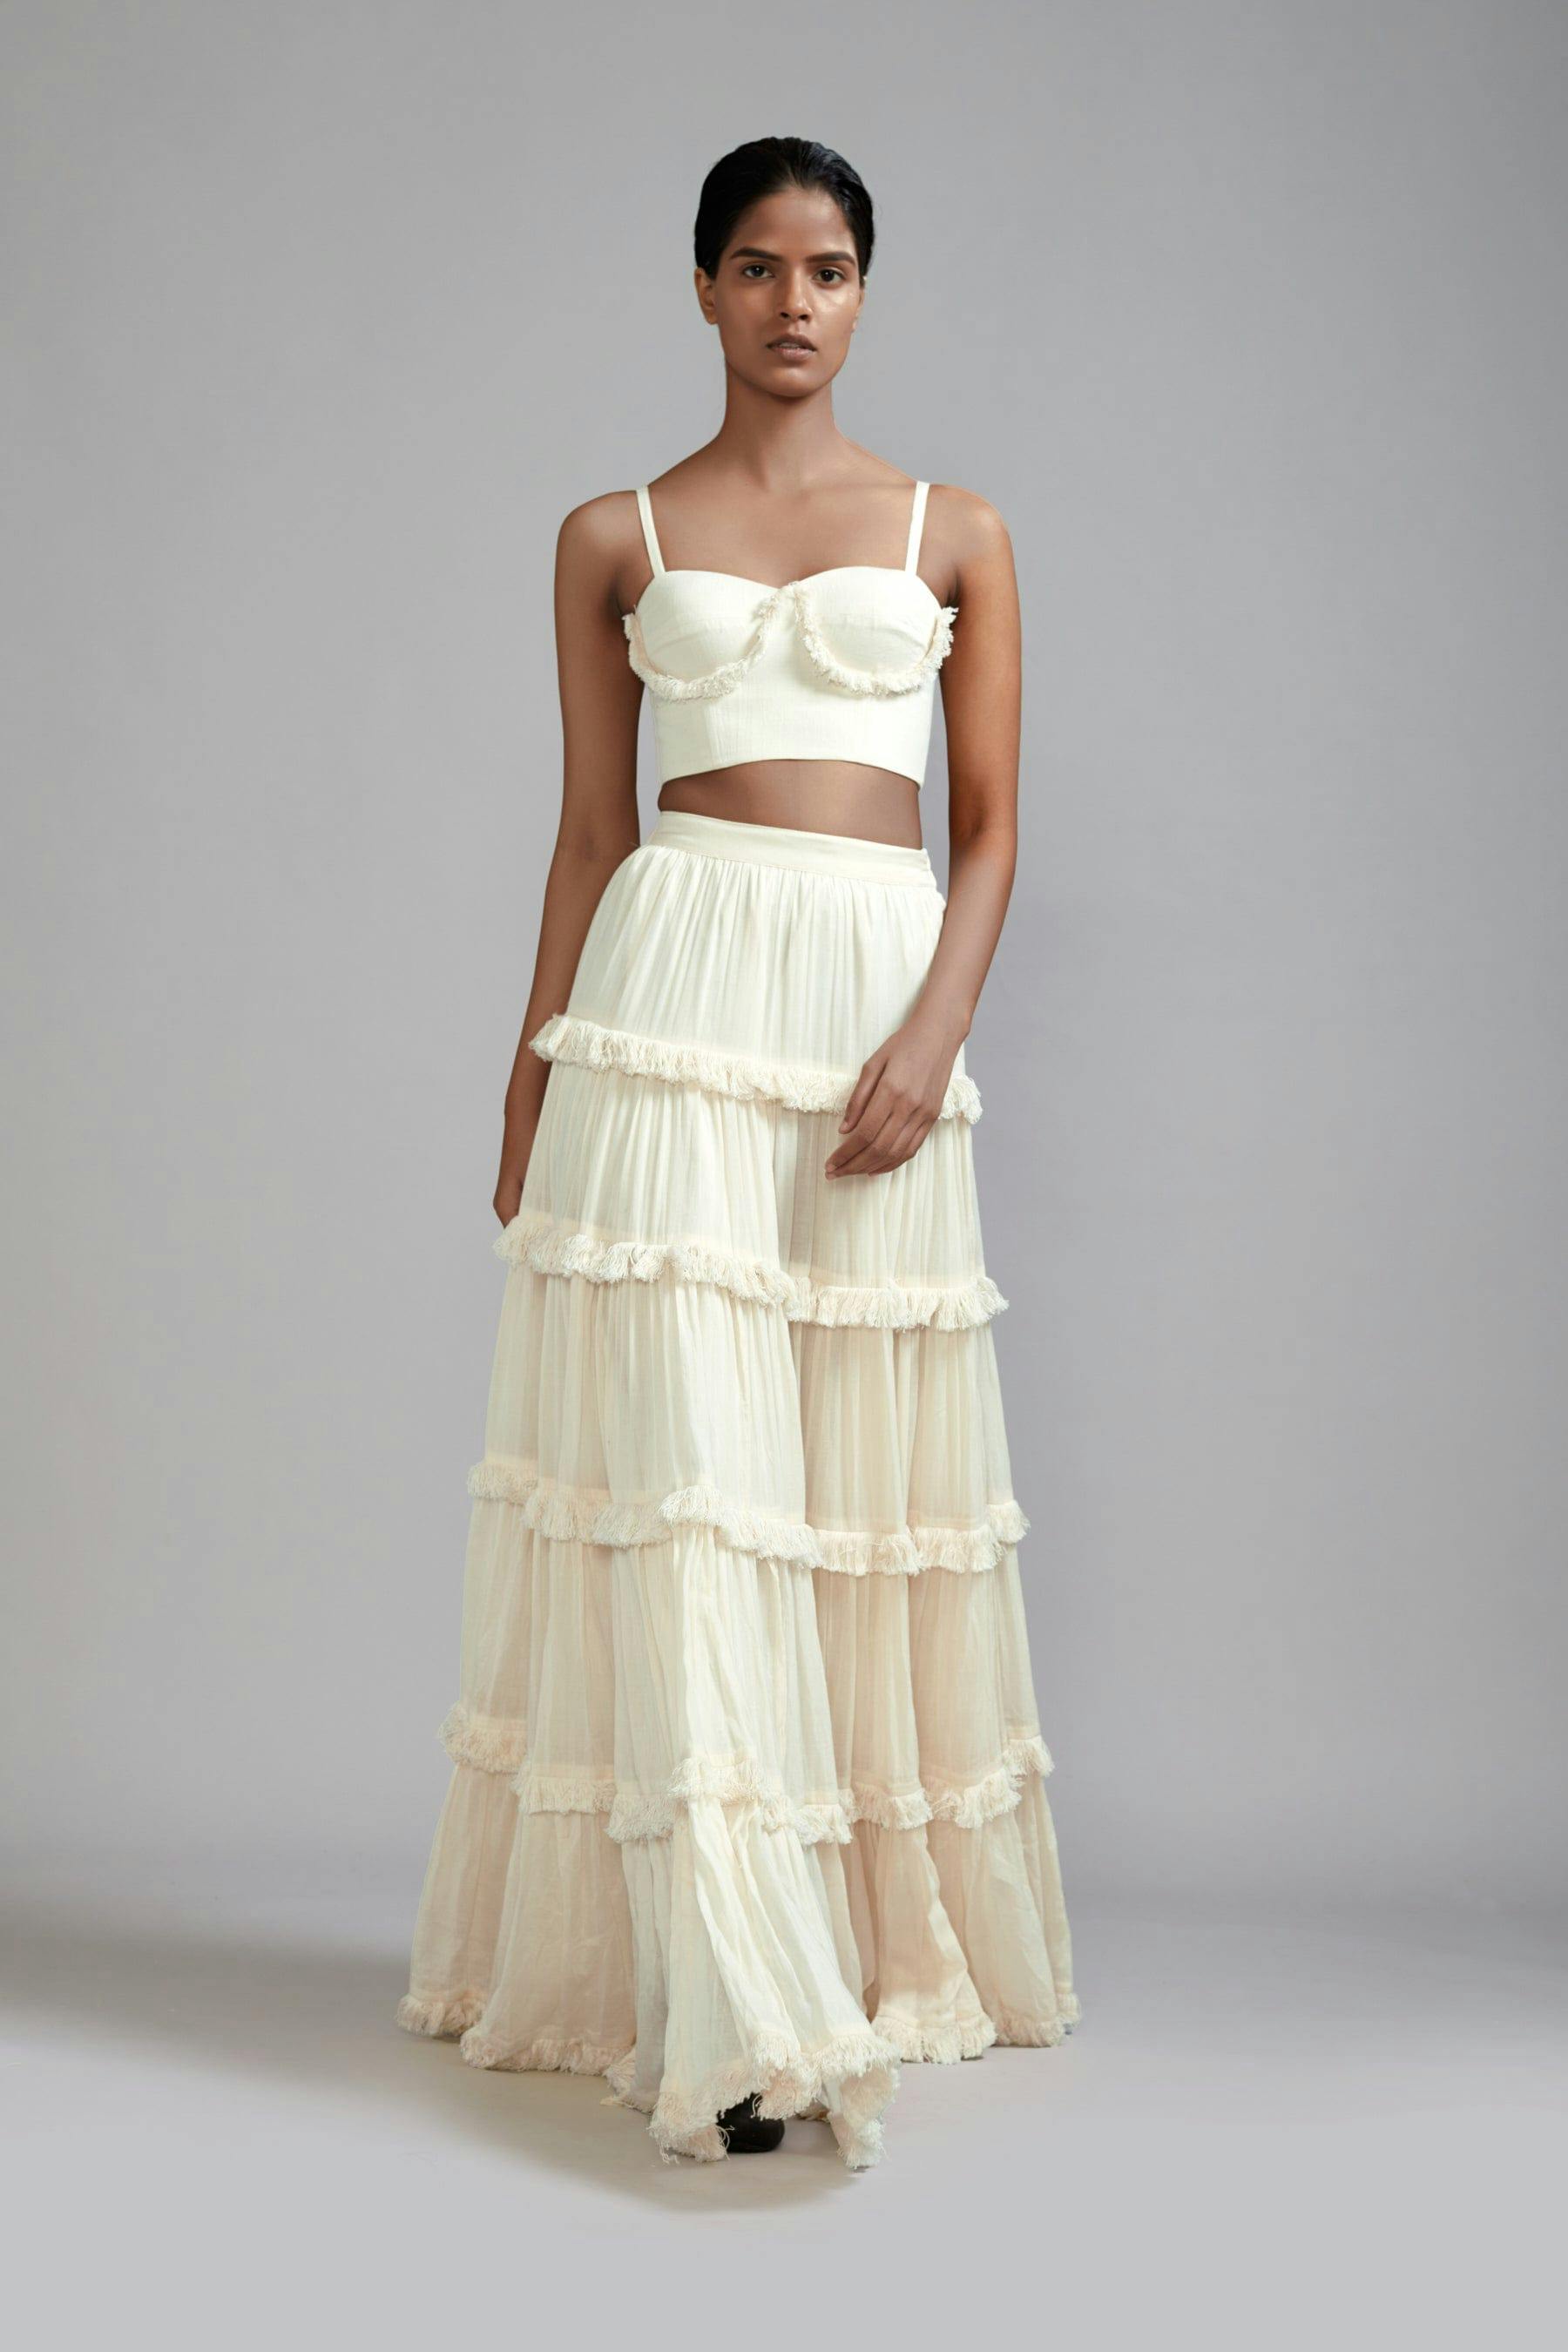 Off-White Fringed Corset, a product by Style Mati